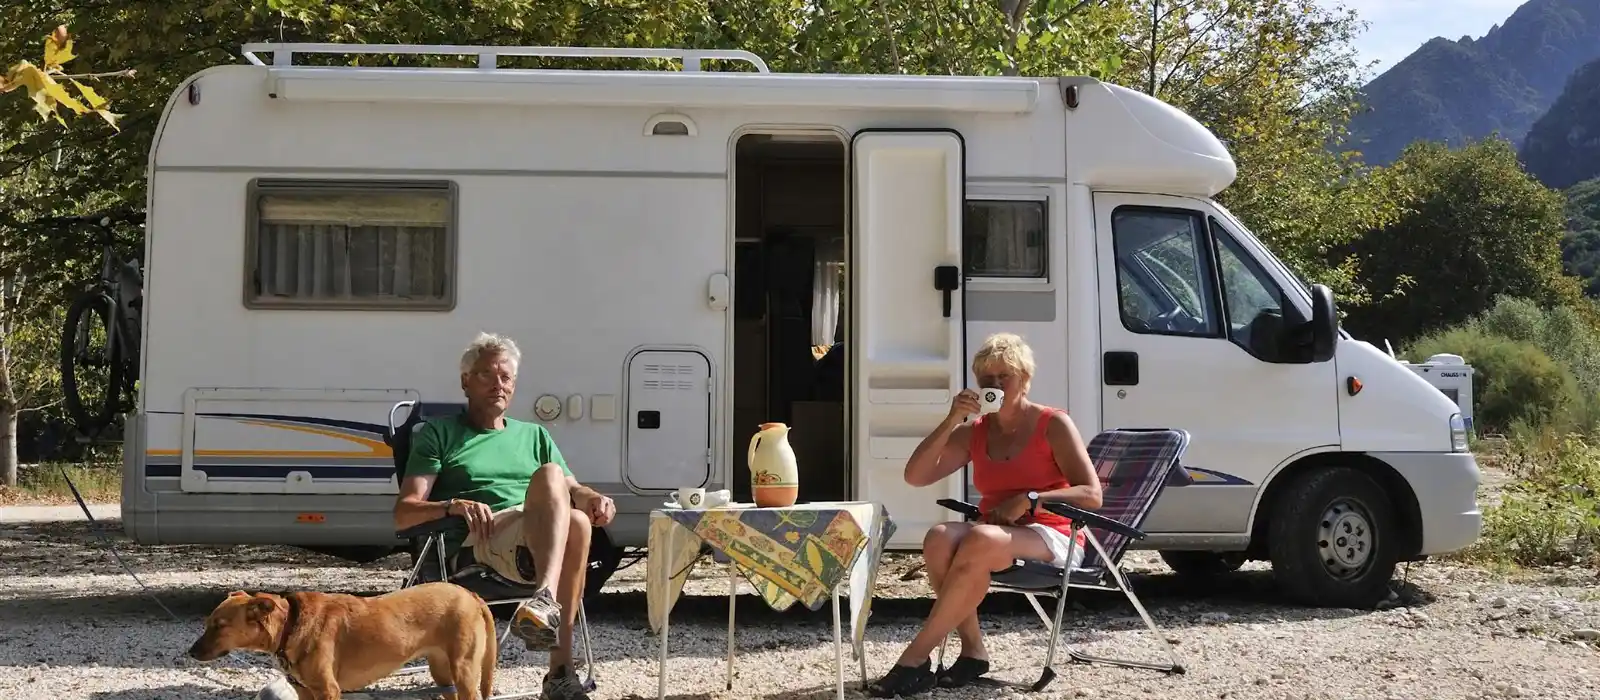 Caravan holidays with dogs